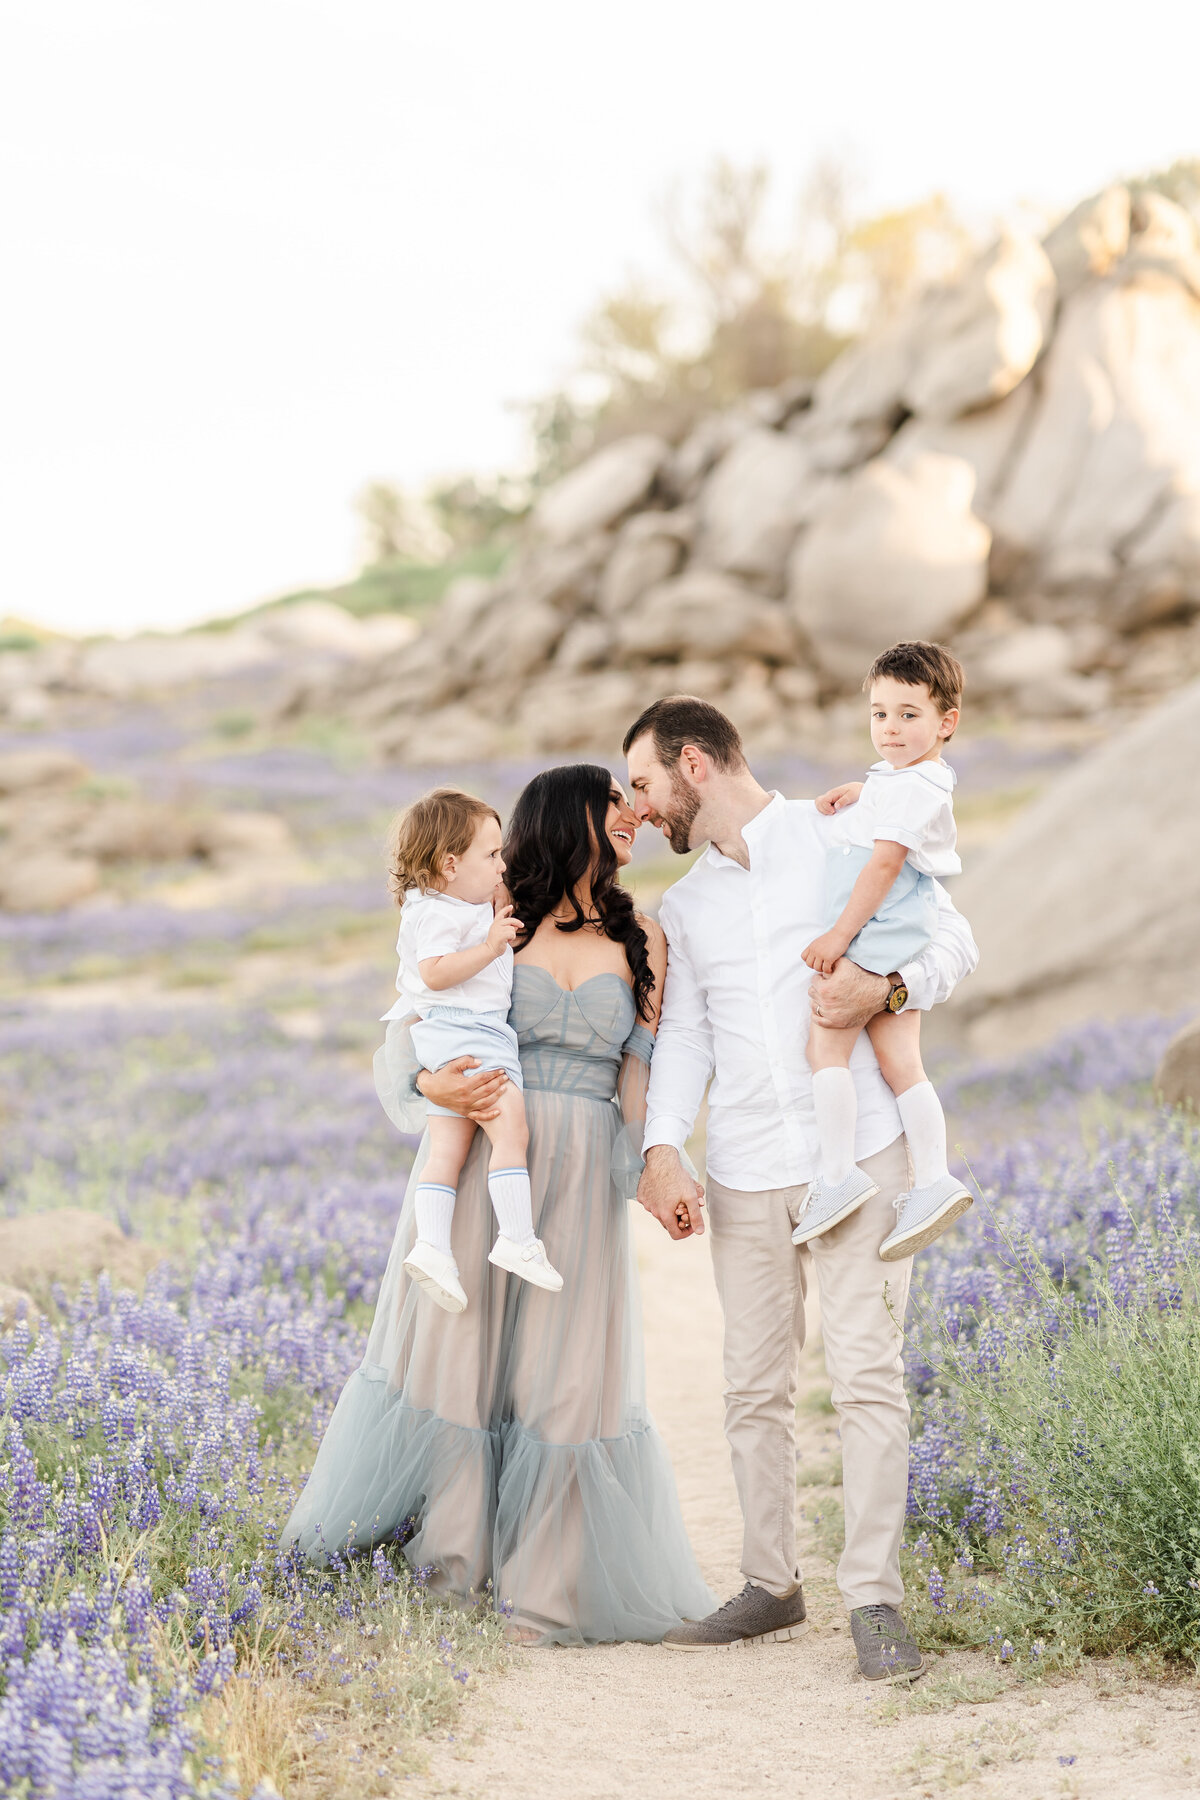 A family of four stands in a field of lupines as mom and dad gently touch foreheads as they hold their young sons photographed by bay area photographer, Light Livin Photography.